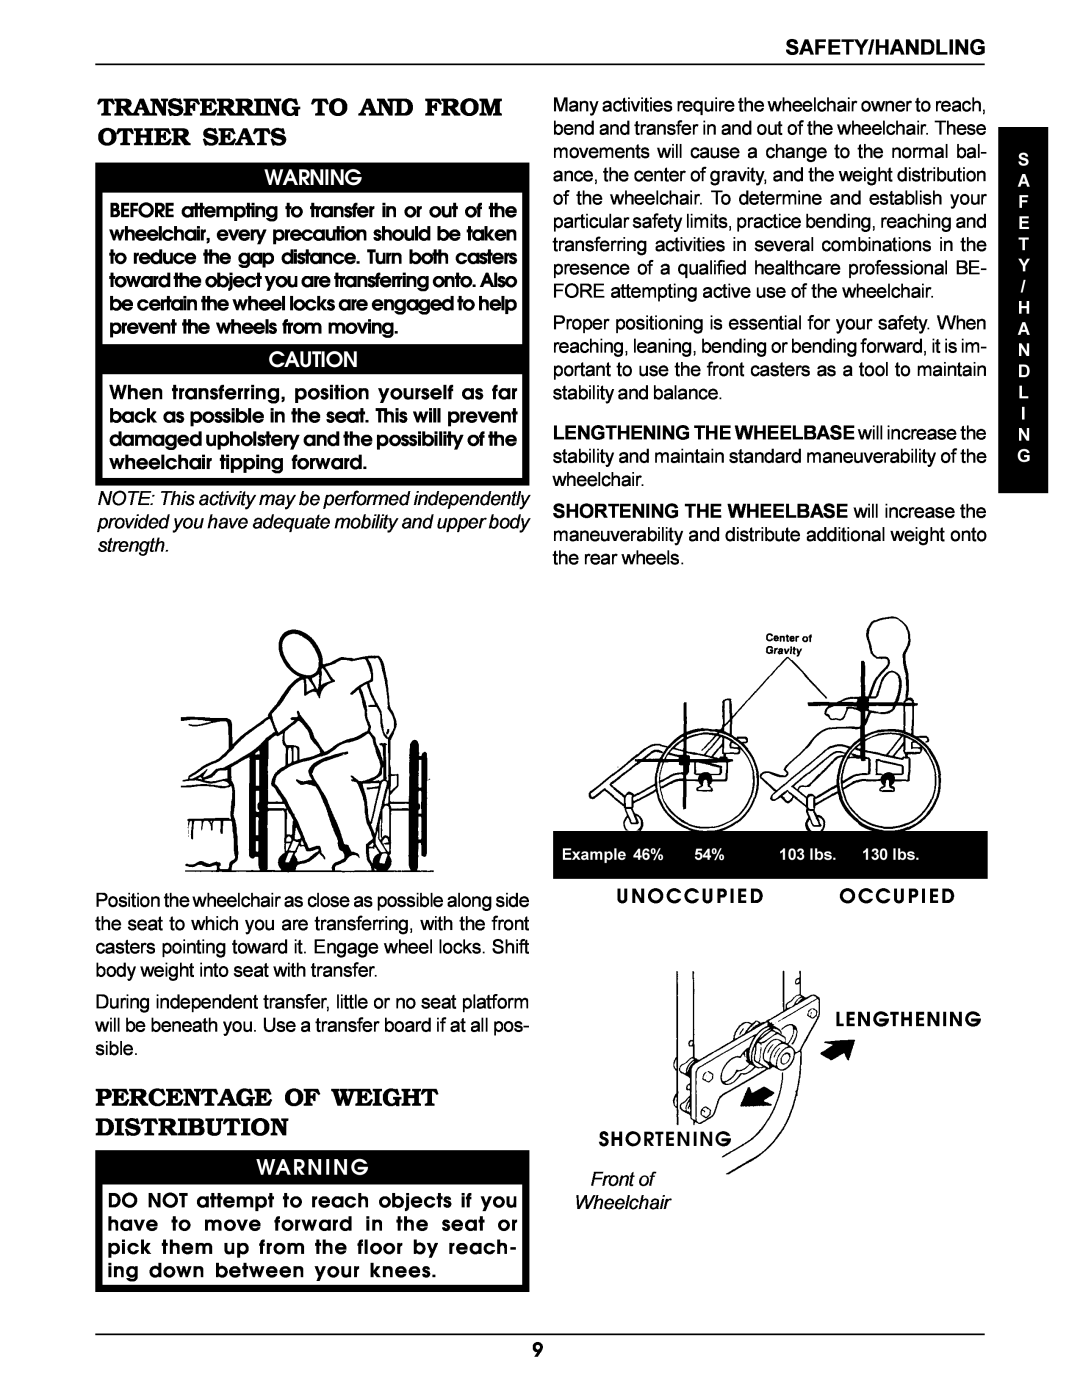 Invacare Pro Series manual Transferring To And From, Other Seats, Percentage Of Weight Distribution, Safety/Handling 